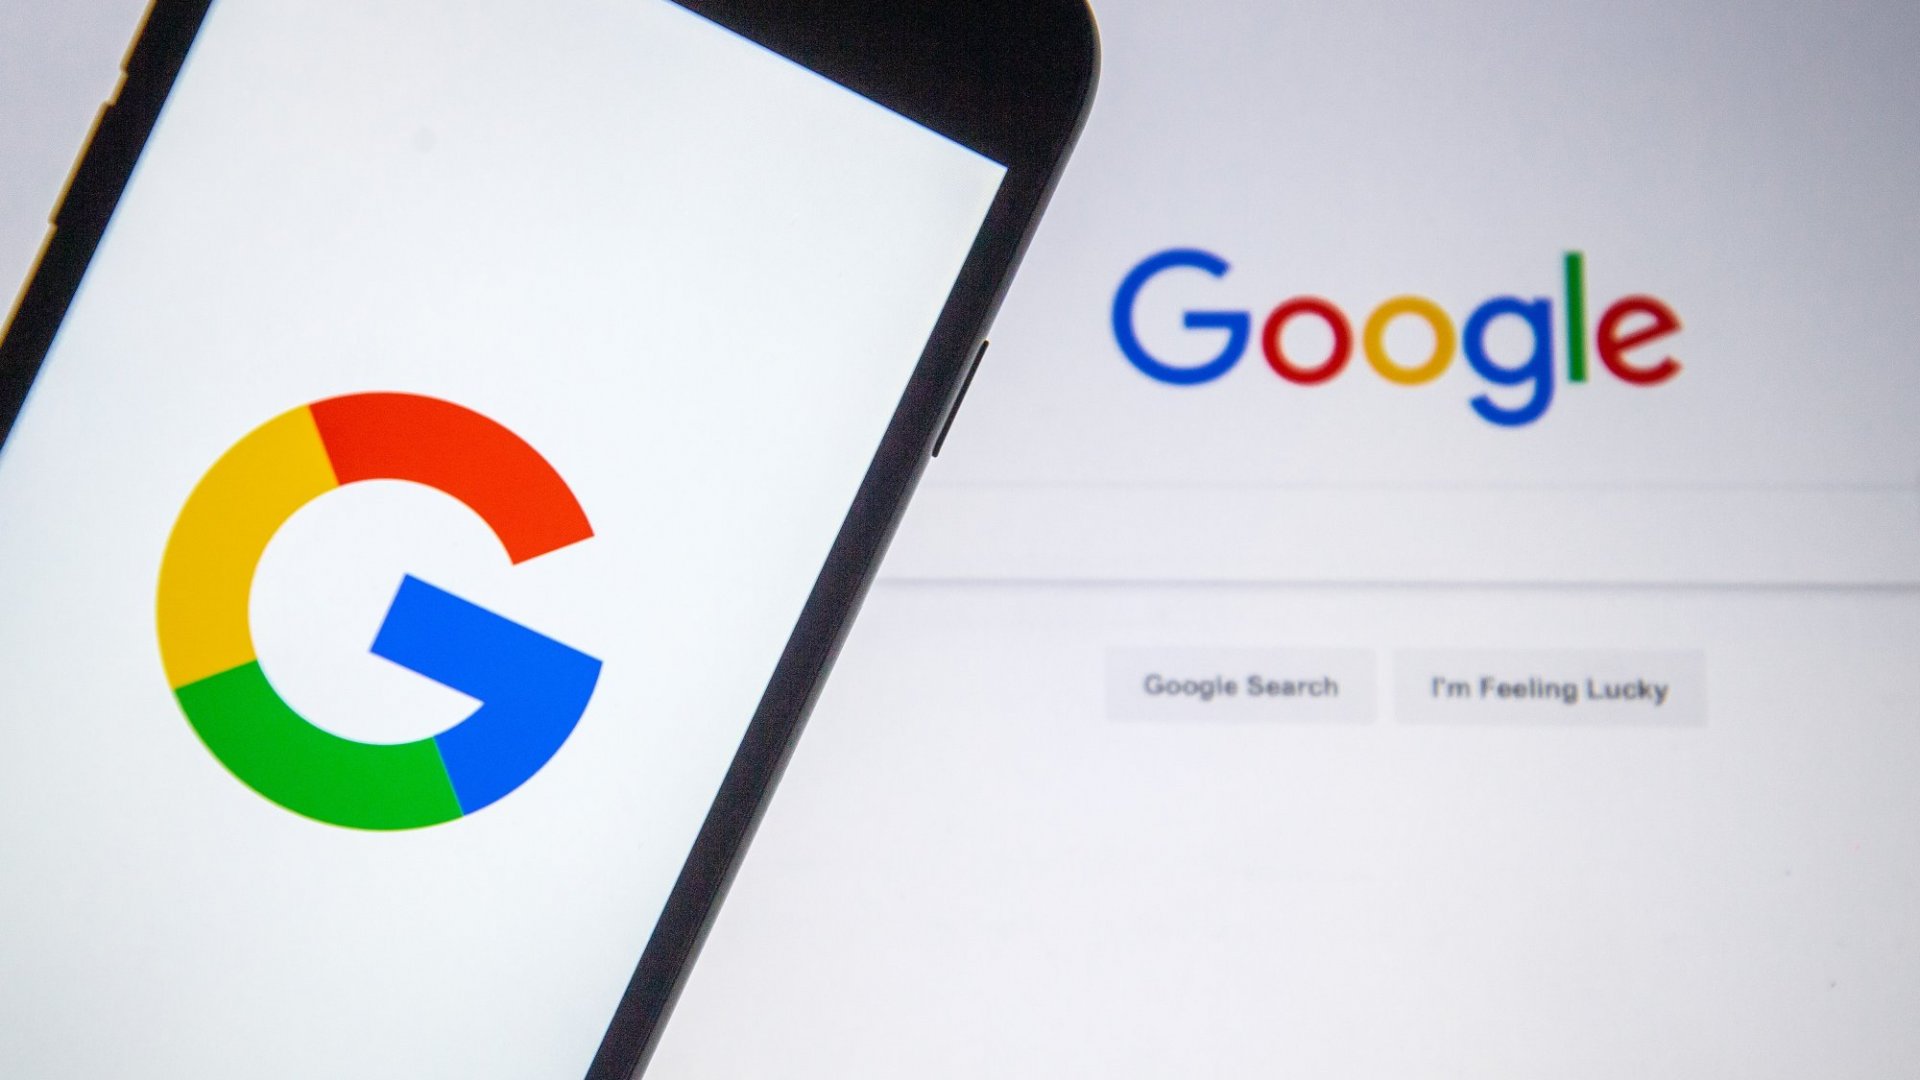 Google Search gets a major upgrade on mobile that focuses on simplicity